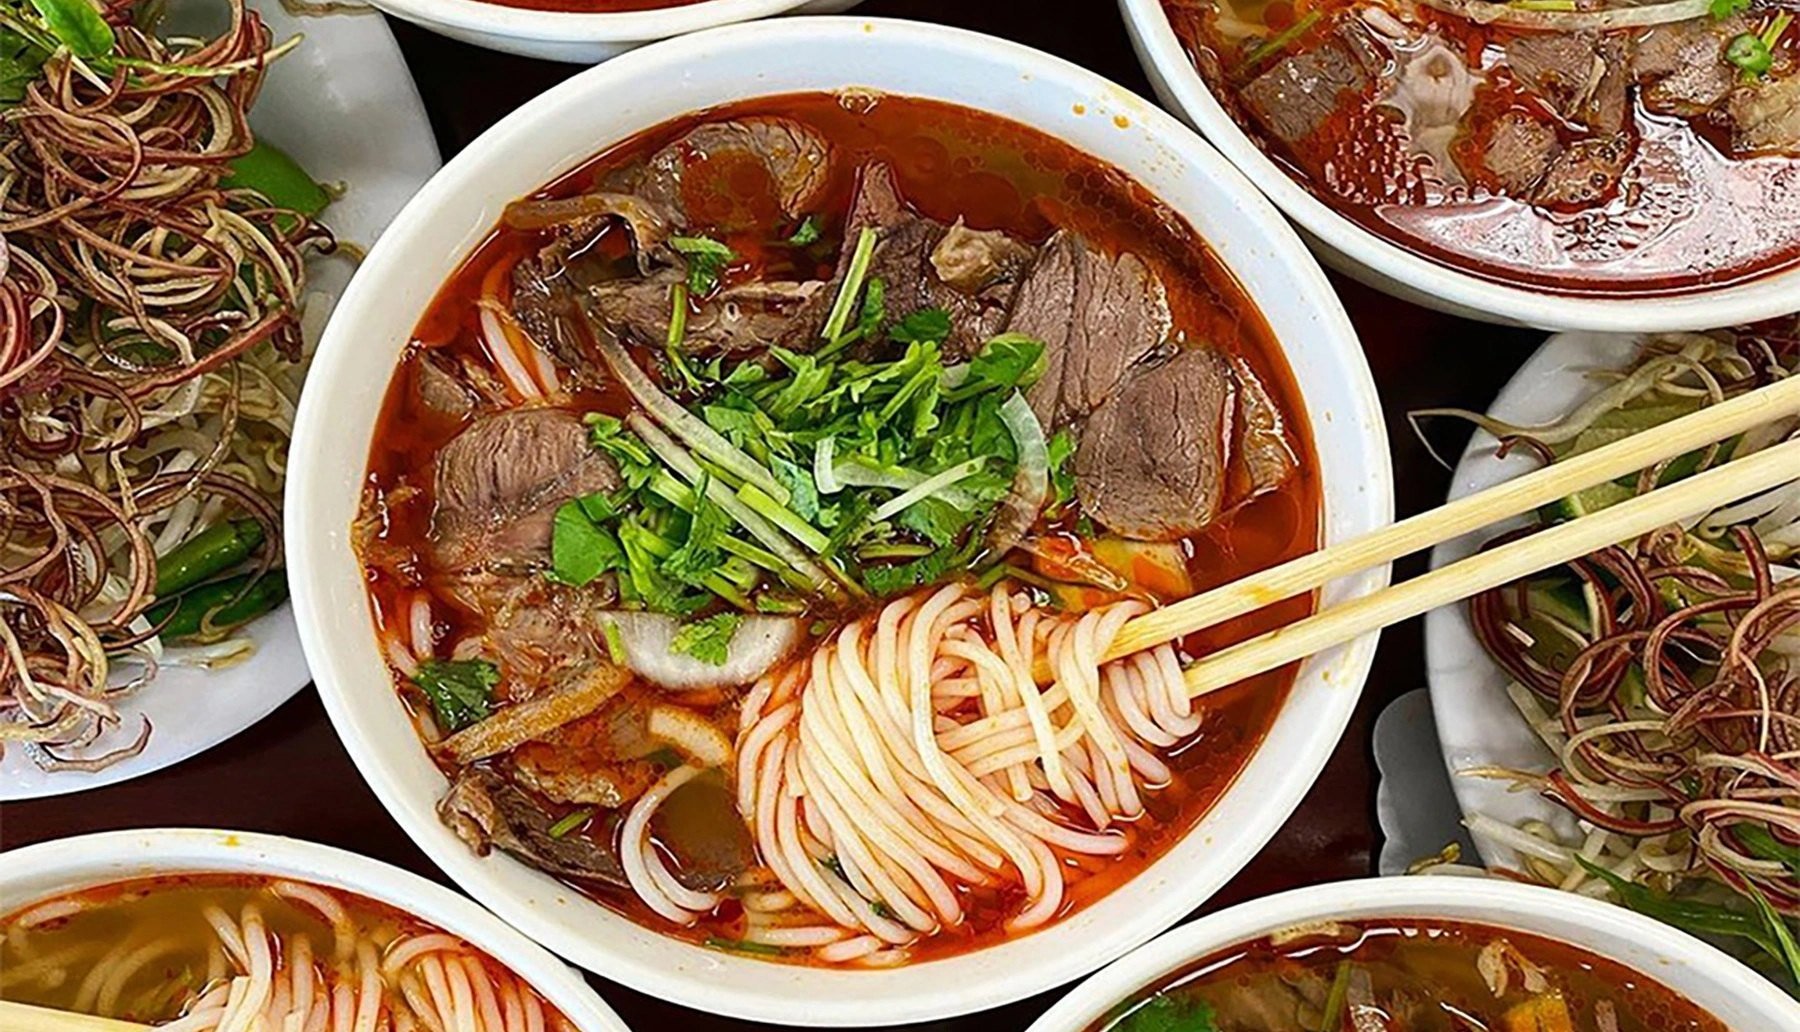 Bun Bo Hue (Hue Beef Noodle Soup) is one of the most famous traditional foods in Hue